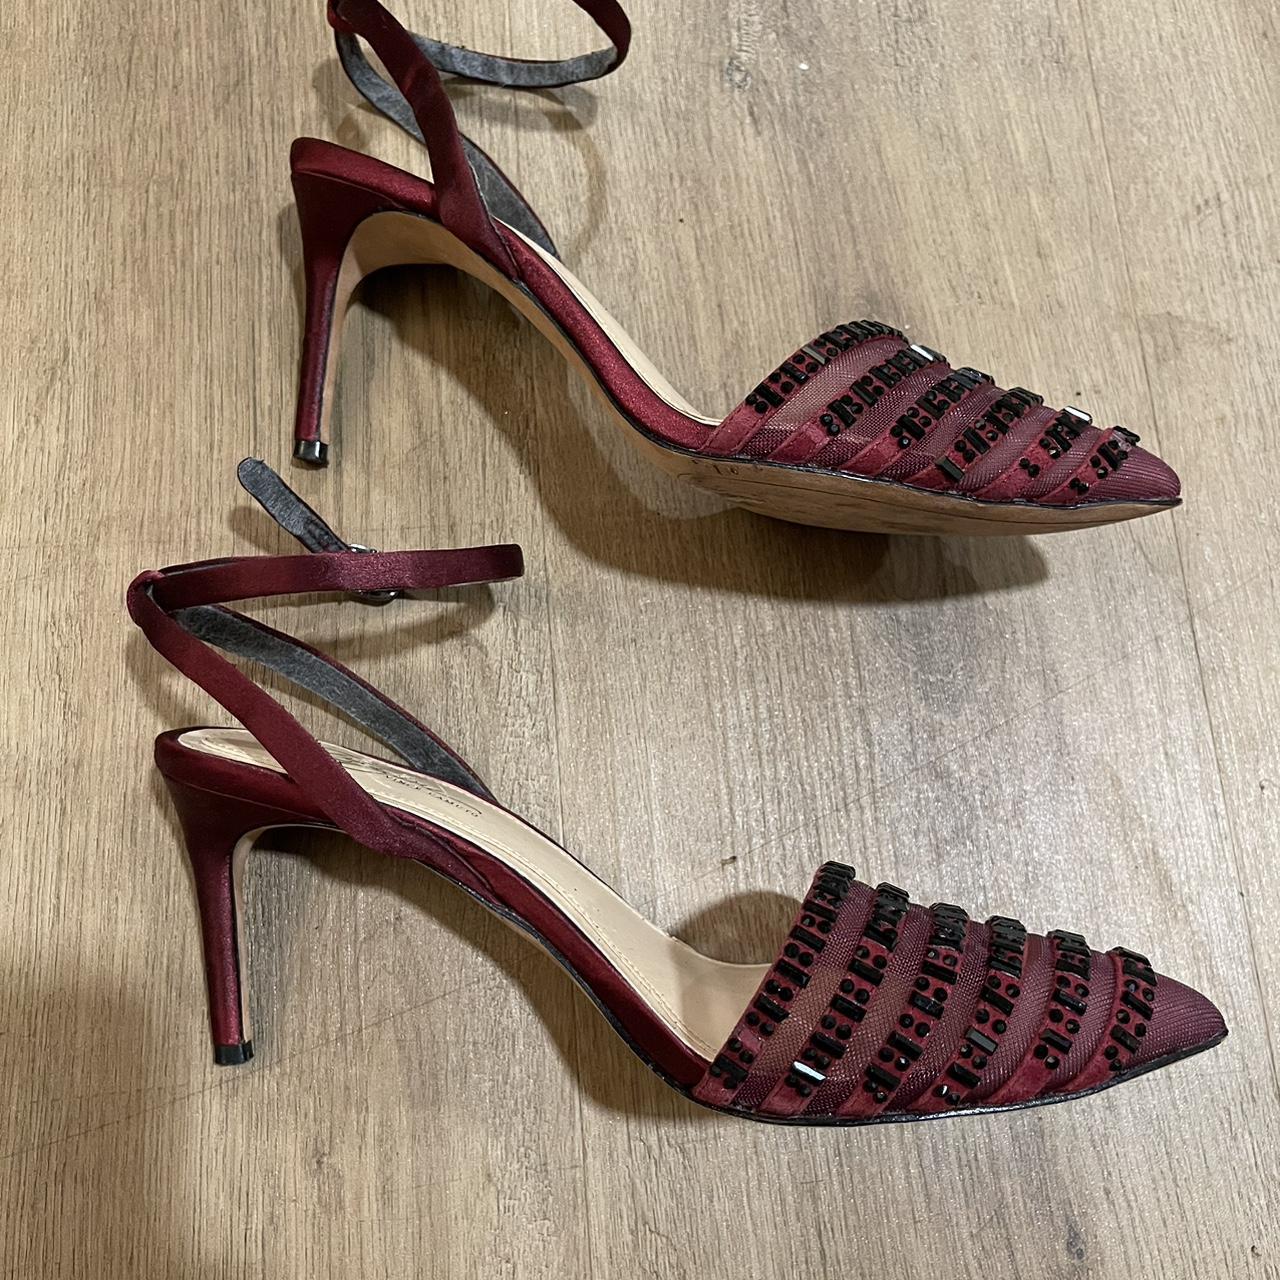 Vince Camuto Women's Burgundy Courts (3)